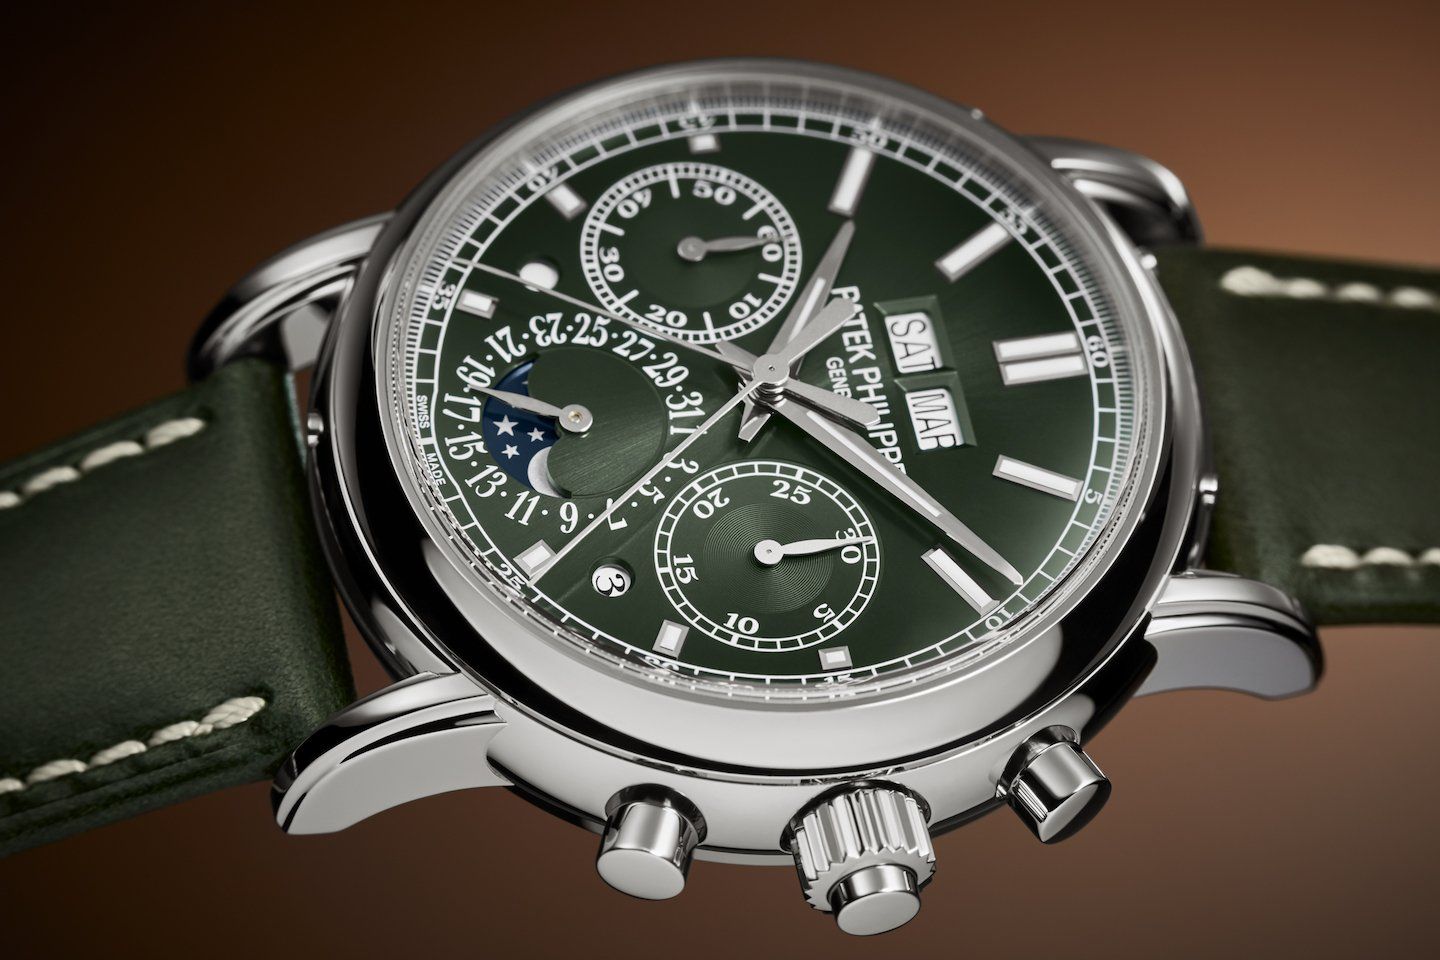 Ref. 5204G-001 split-seconds chronograph with perpetual calendar